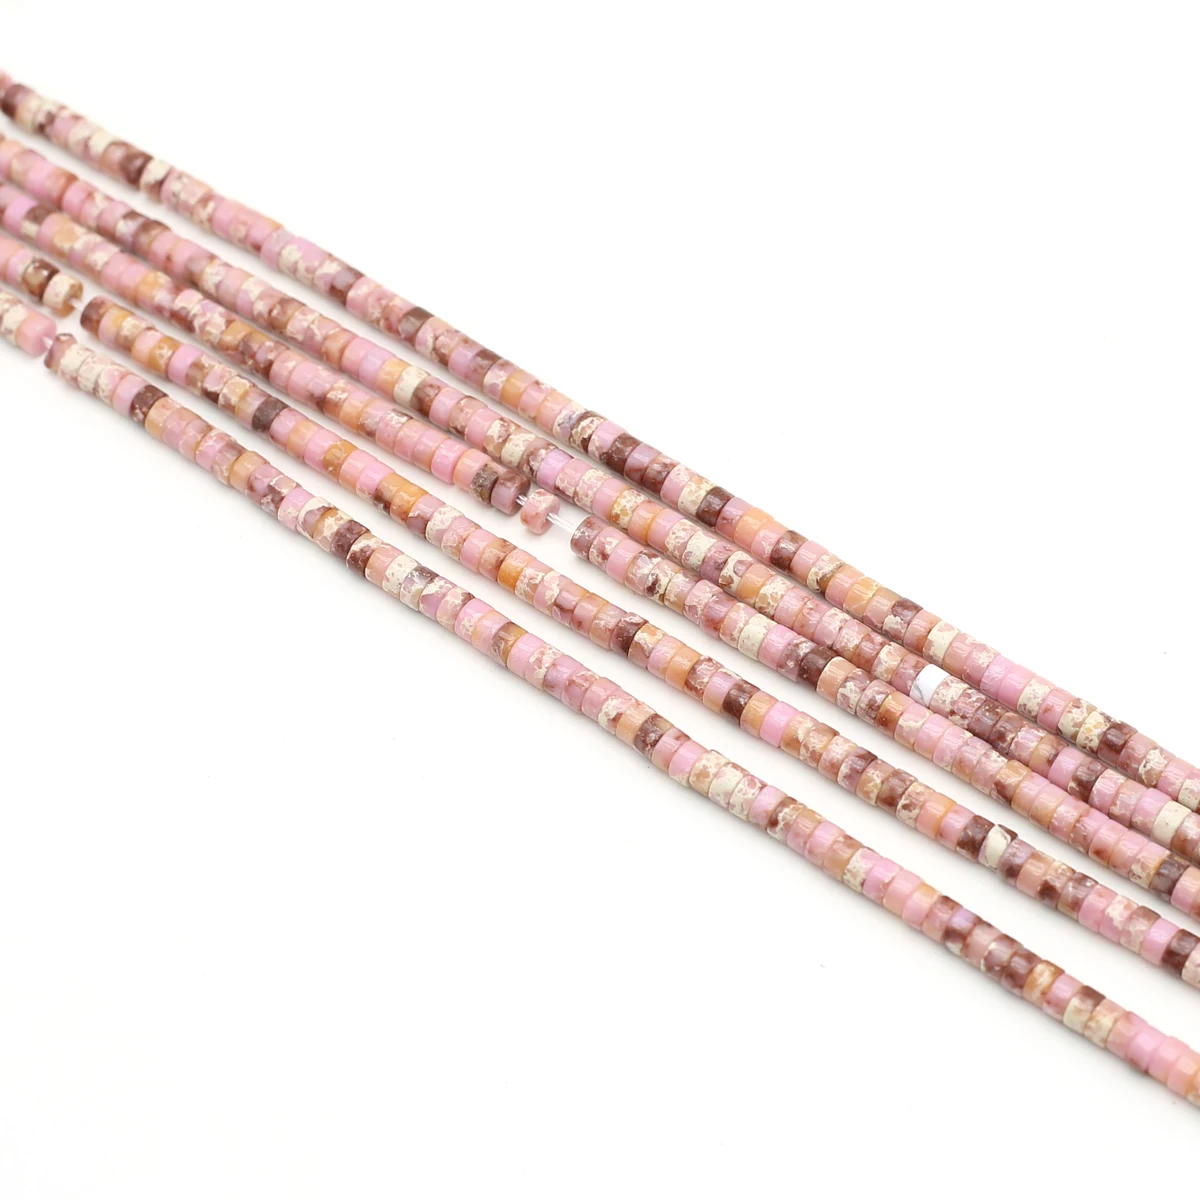 

Faceted Natural Pink Emperor Stone Imperial Jasper Beads 2x4mm Cylindrical Loose Spacer Beads for Jewelry Making DIY Accessories